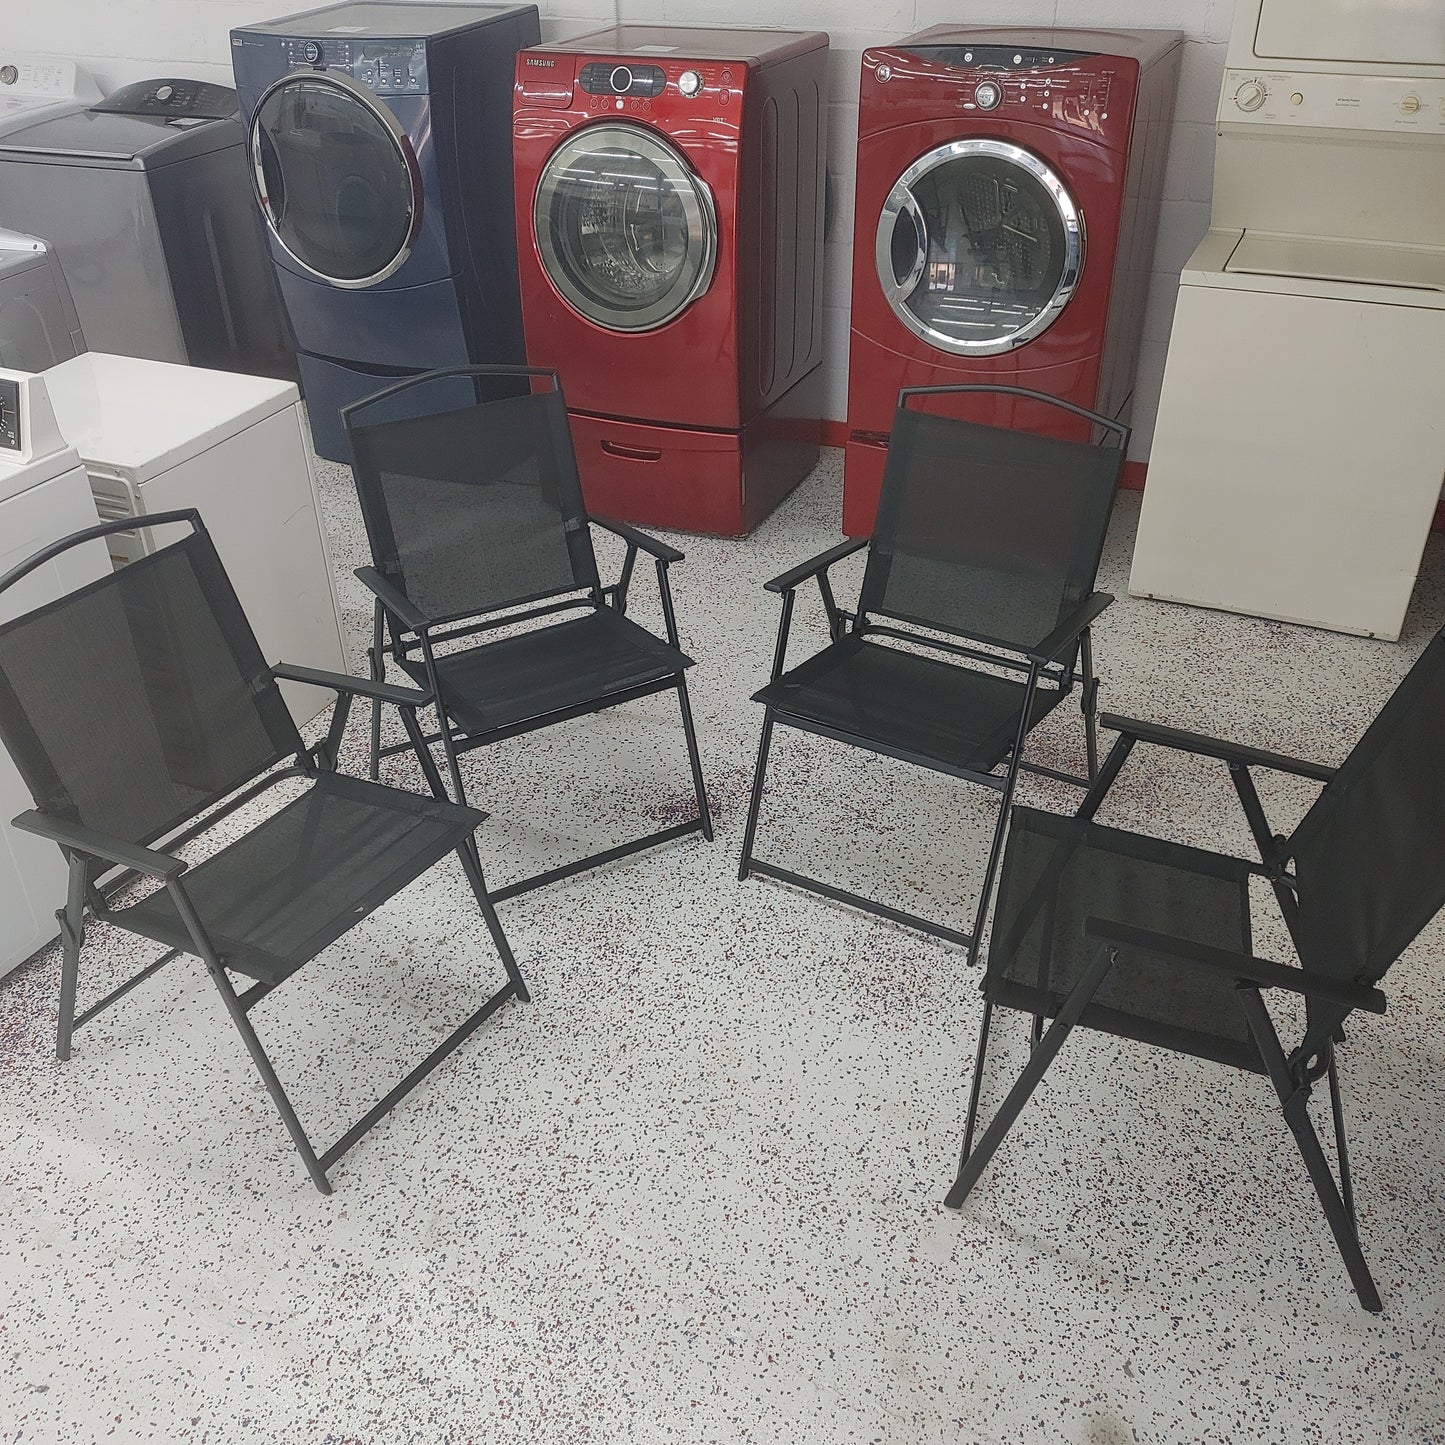 4 new patio chairs